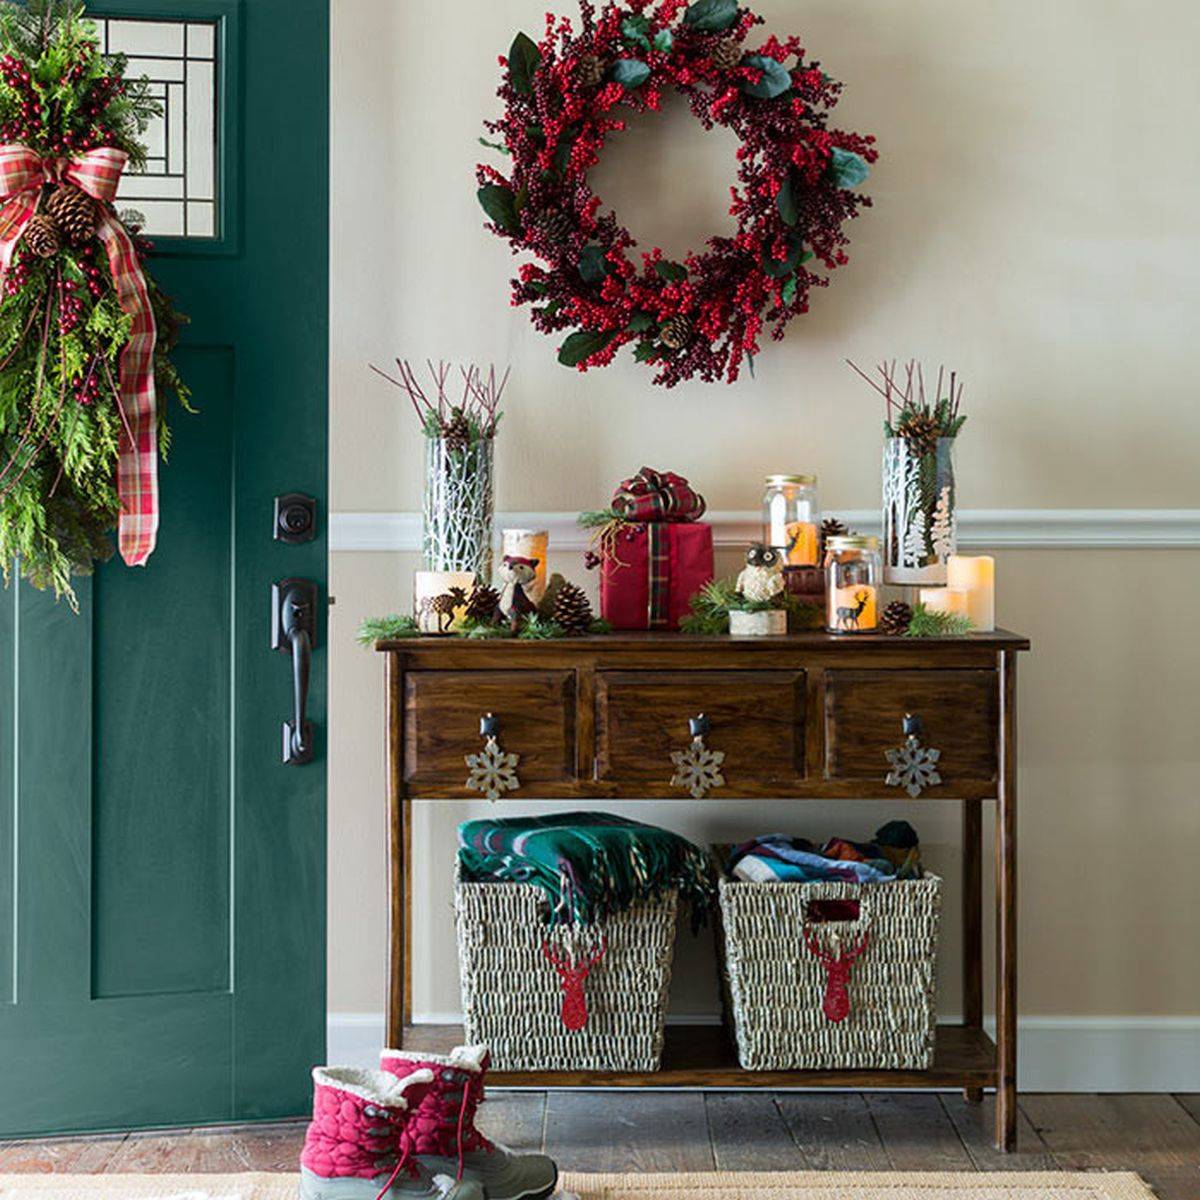 Lovely-Christmas-wreath-adds-Holiday-cheer-to-this-entry-in-an-understated-manner-57012